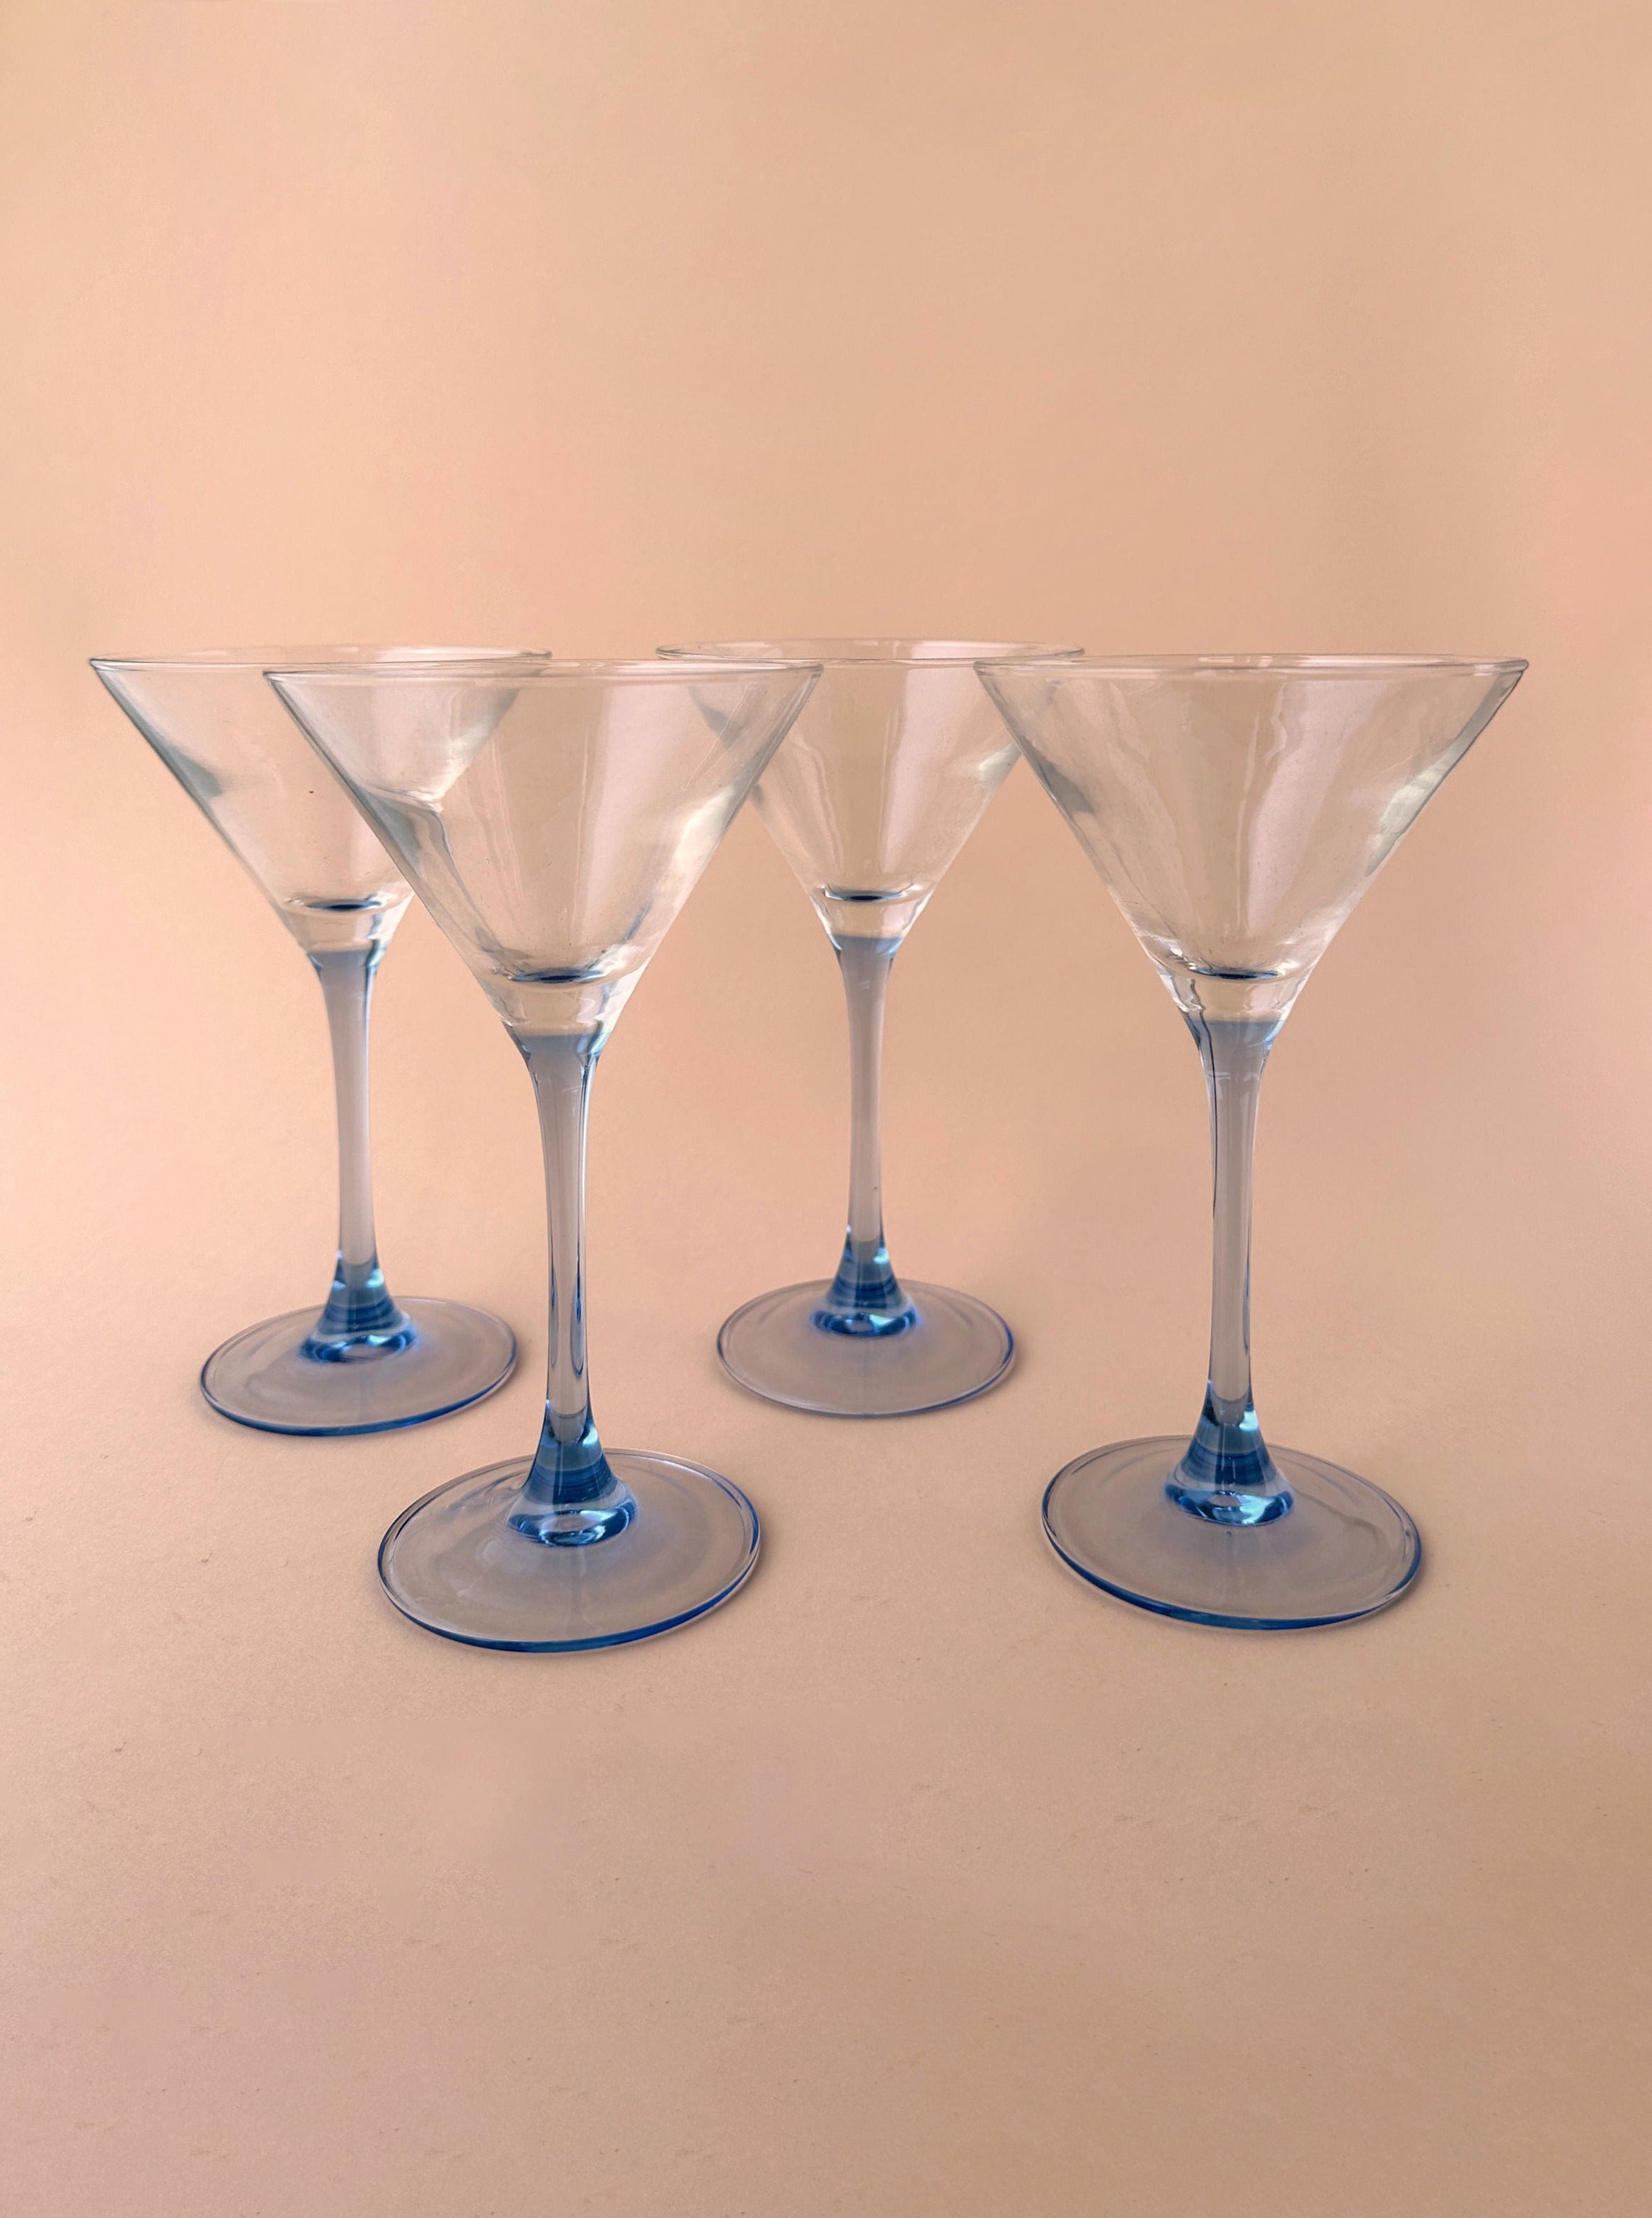 4 French Martini Glasses With Blue Stem